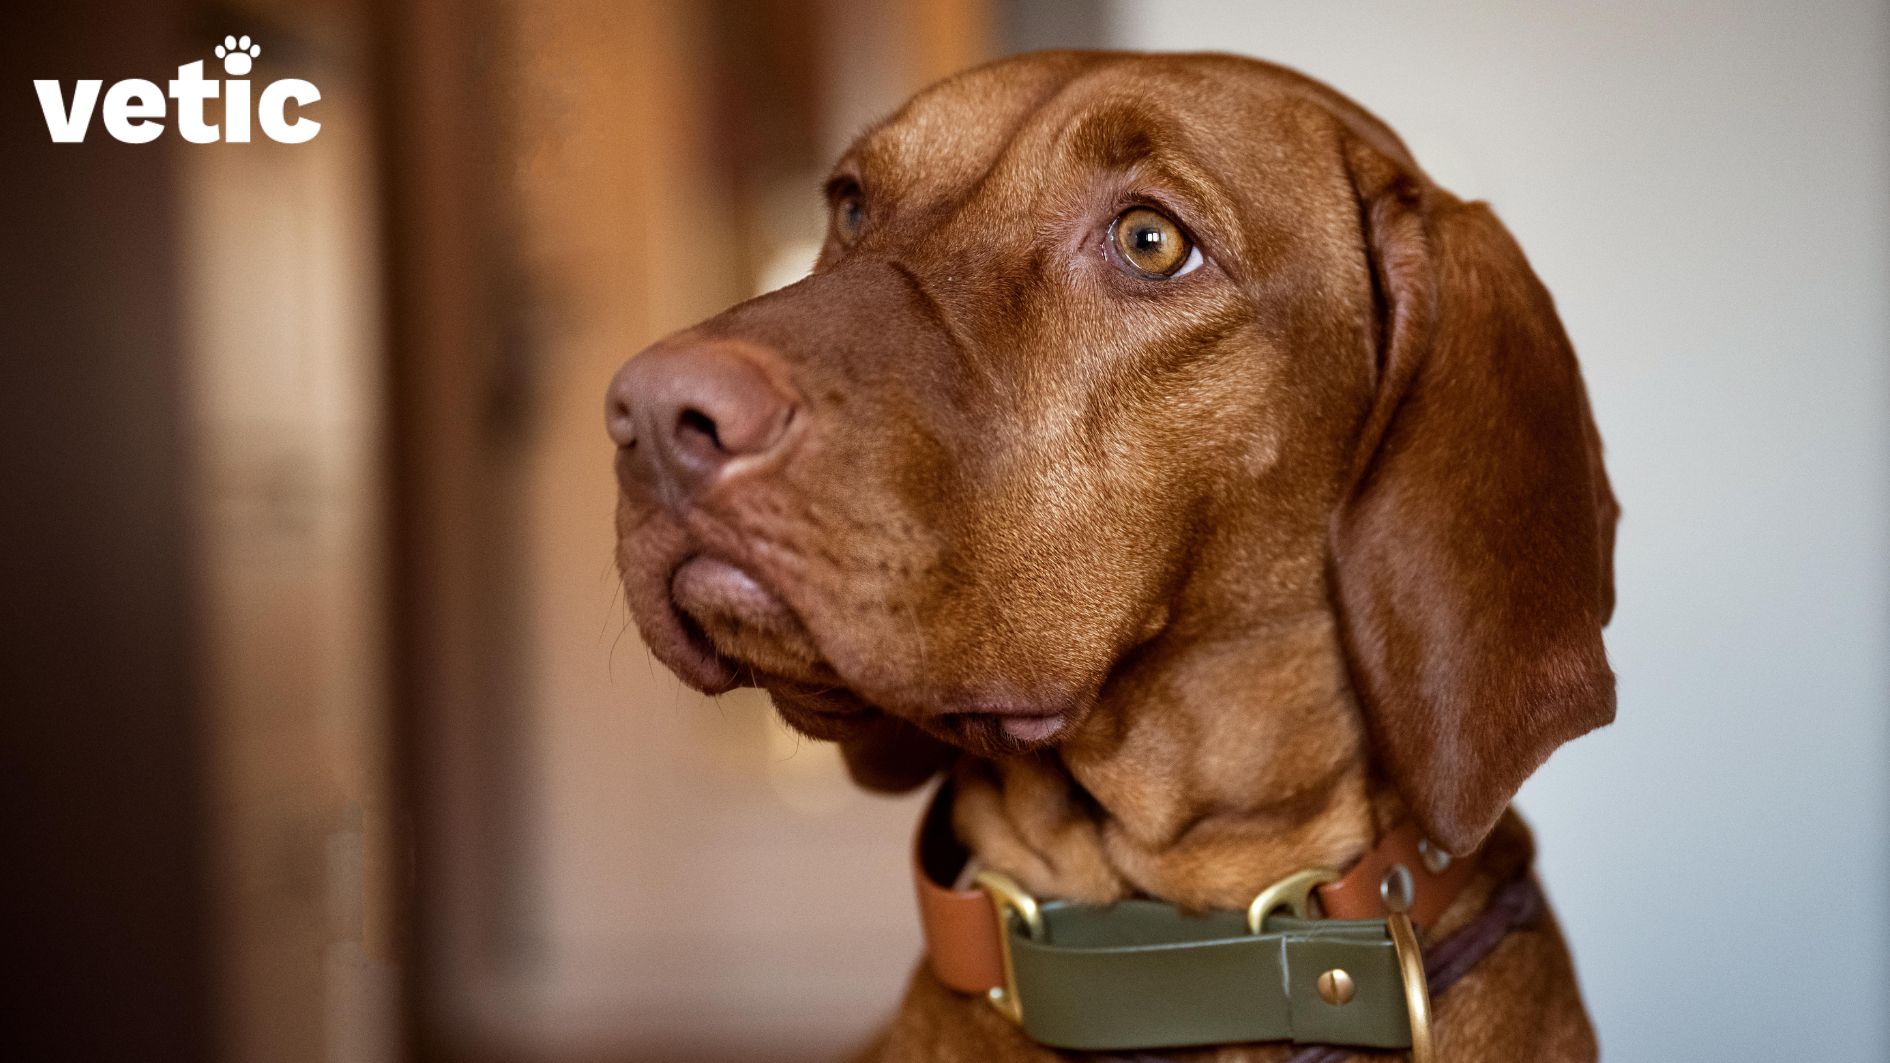 Closeup of adult brown dog wearing a brown and olive green collar.